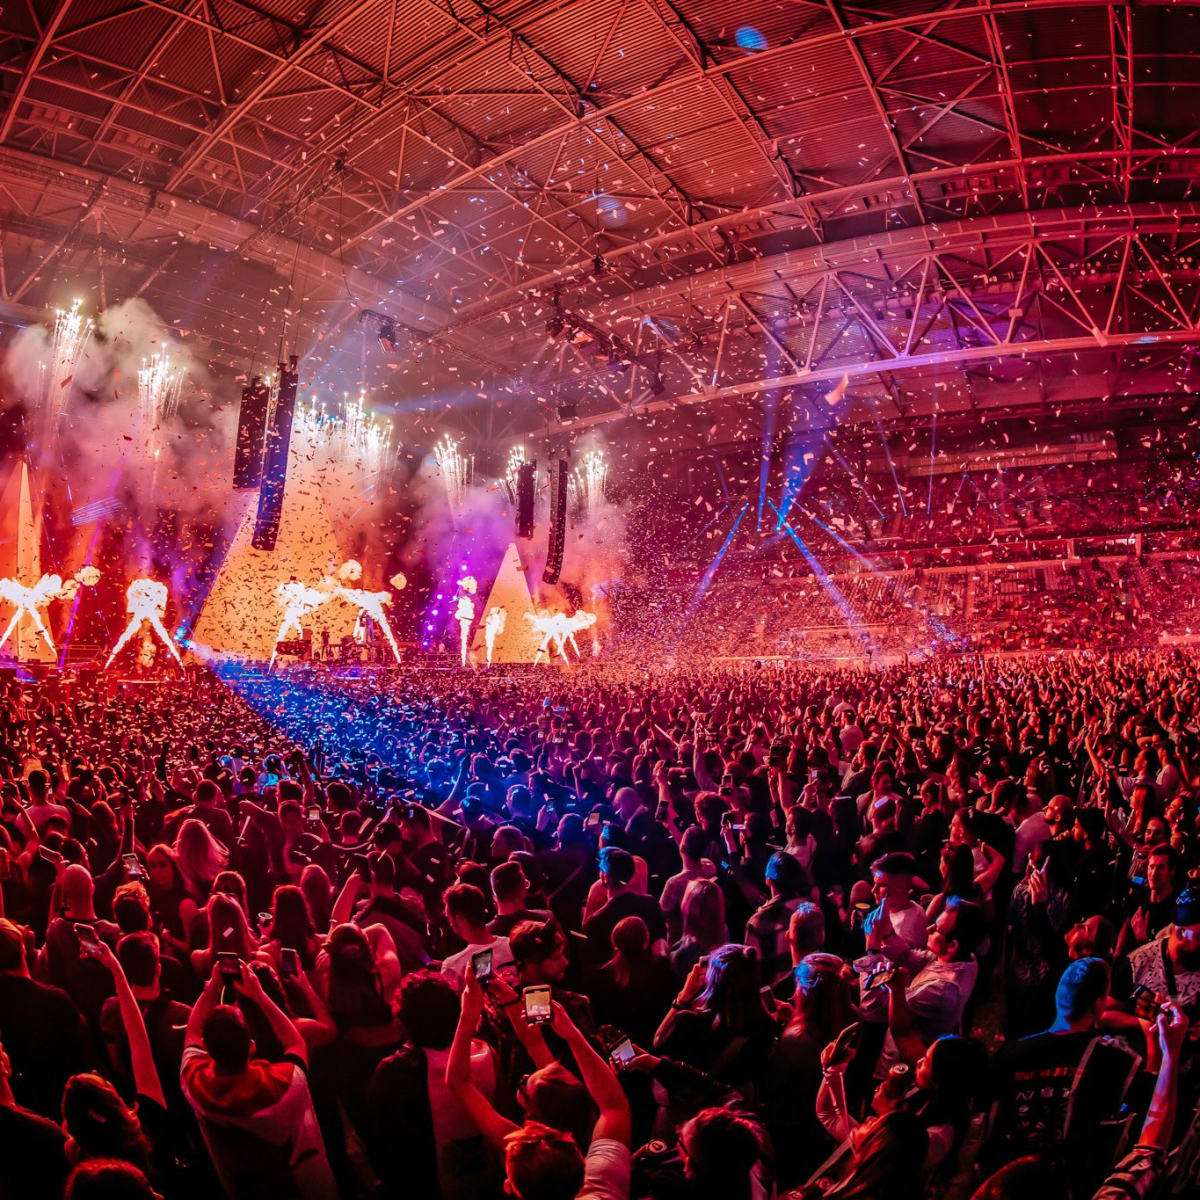 WORLD CLUB DOME's 2022 Edition Was a Testament to Innovation - EDM.com The Latest Electronic Dance Music News, Reviews & Artists